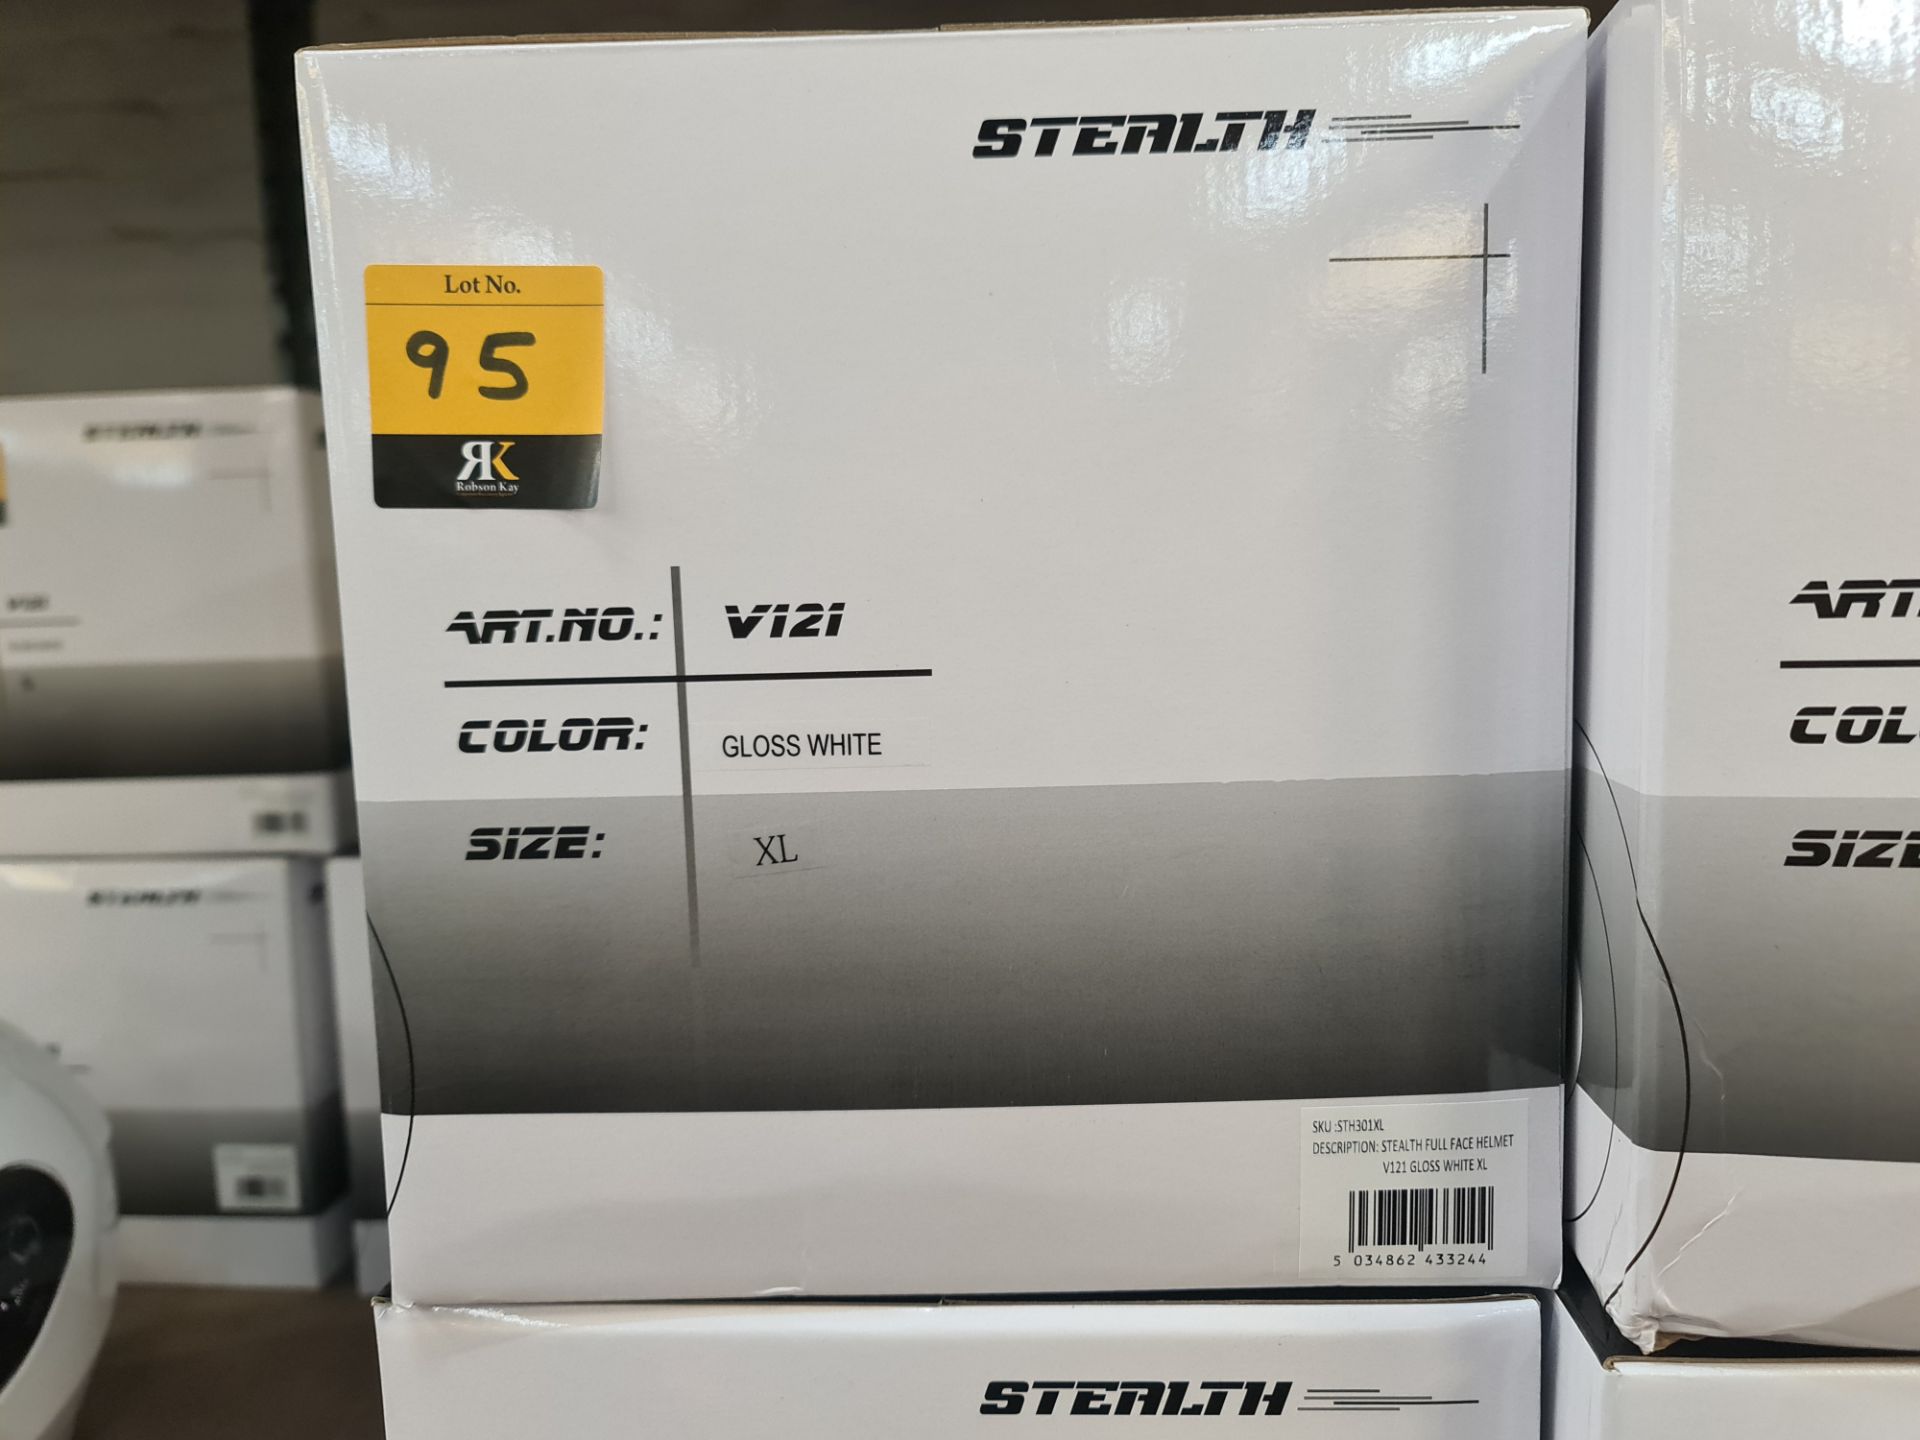 4 off Stealth V121 gloss white helmets - 1 each of S, M, L & XL - Image 2 of 4